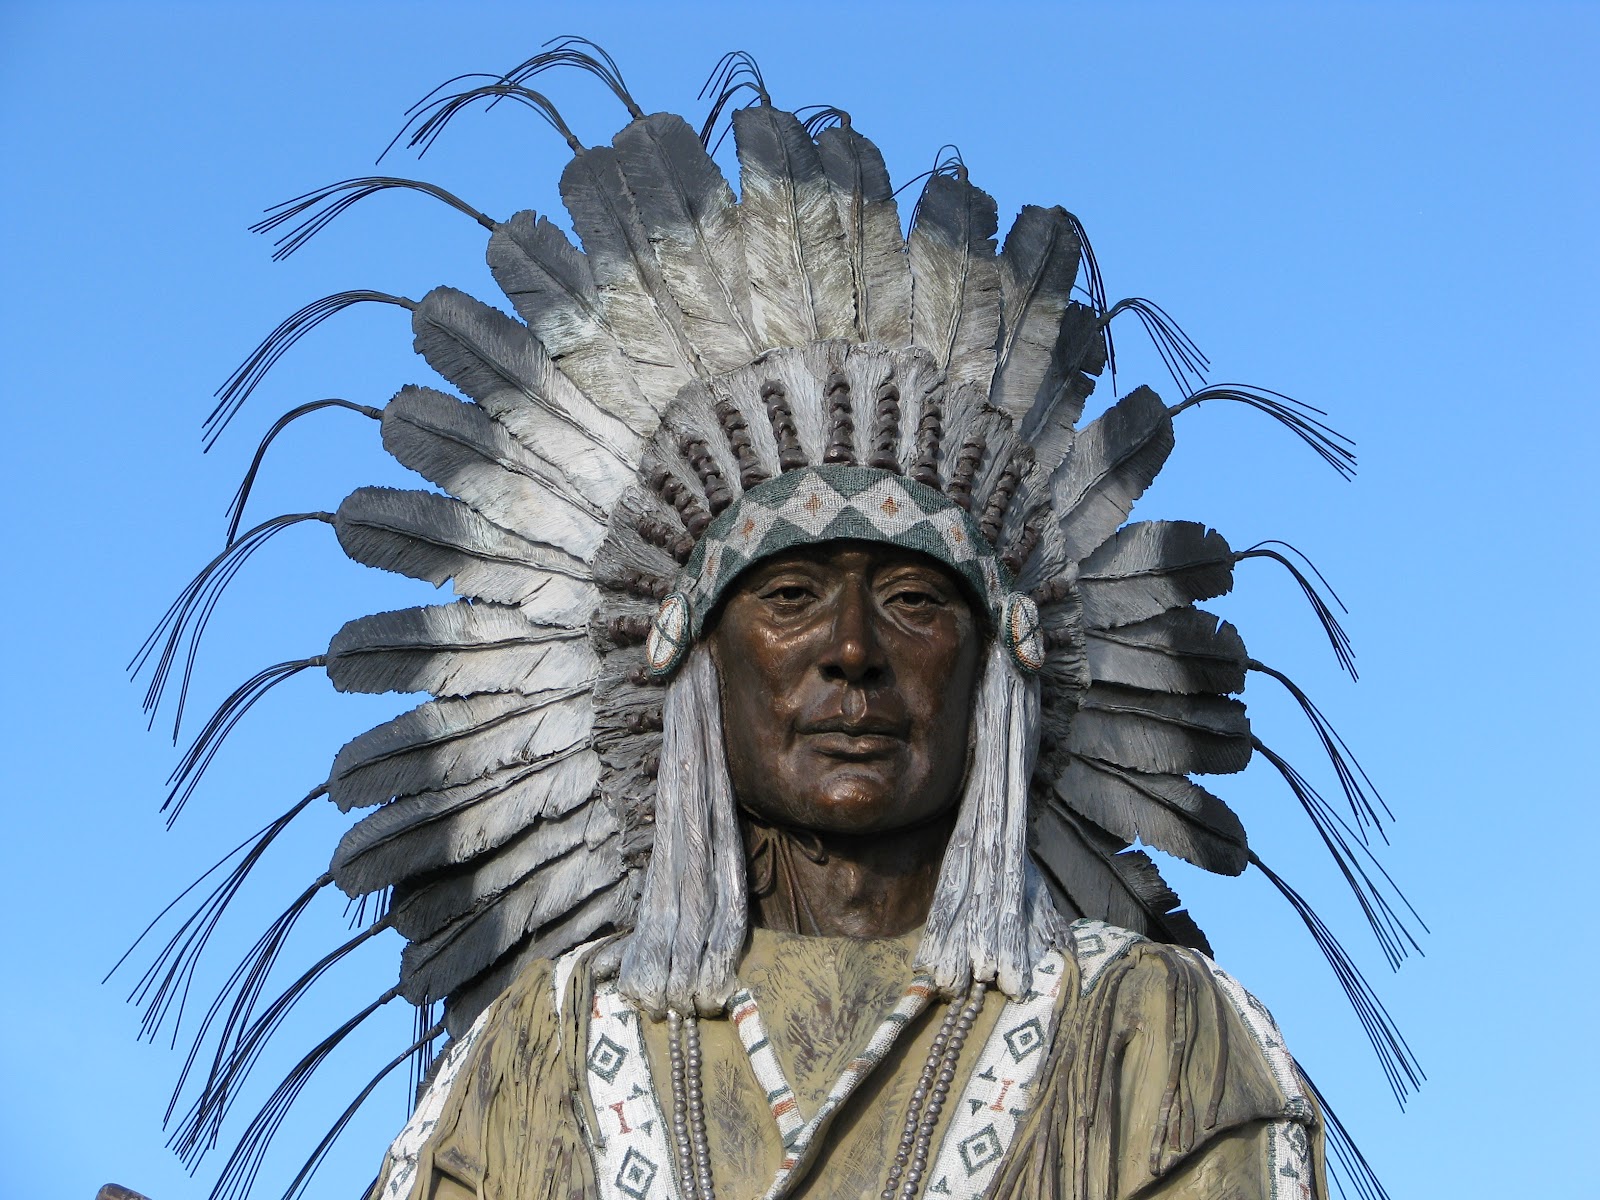 Streets Of Denver: Westin Hotel Indian Chief statue